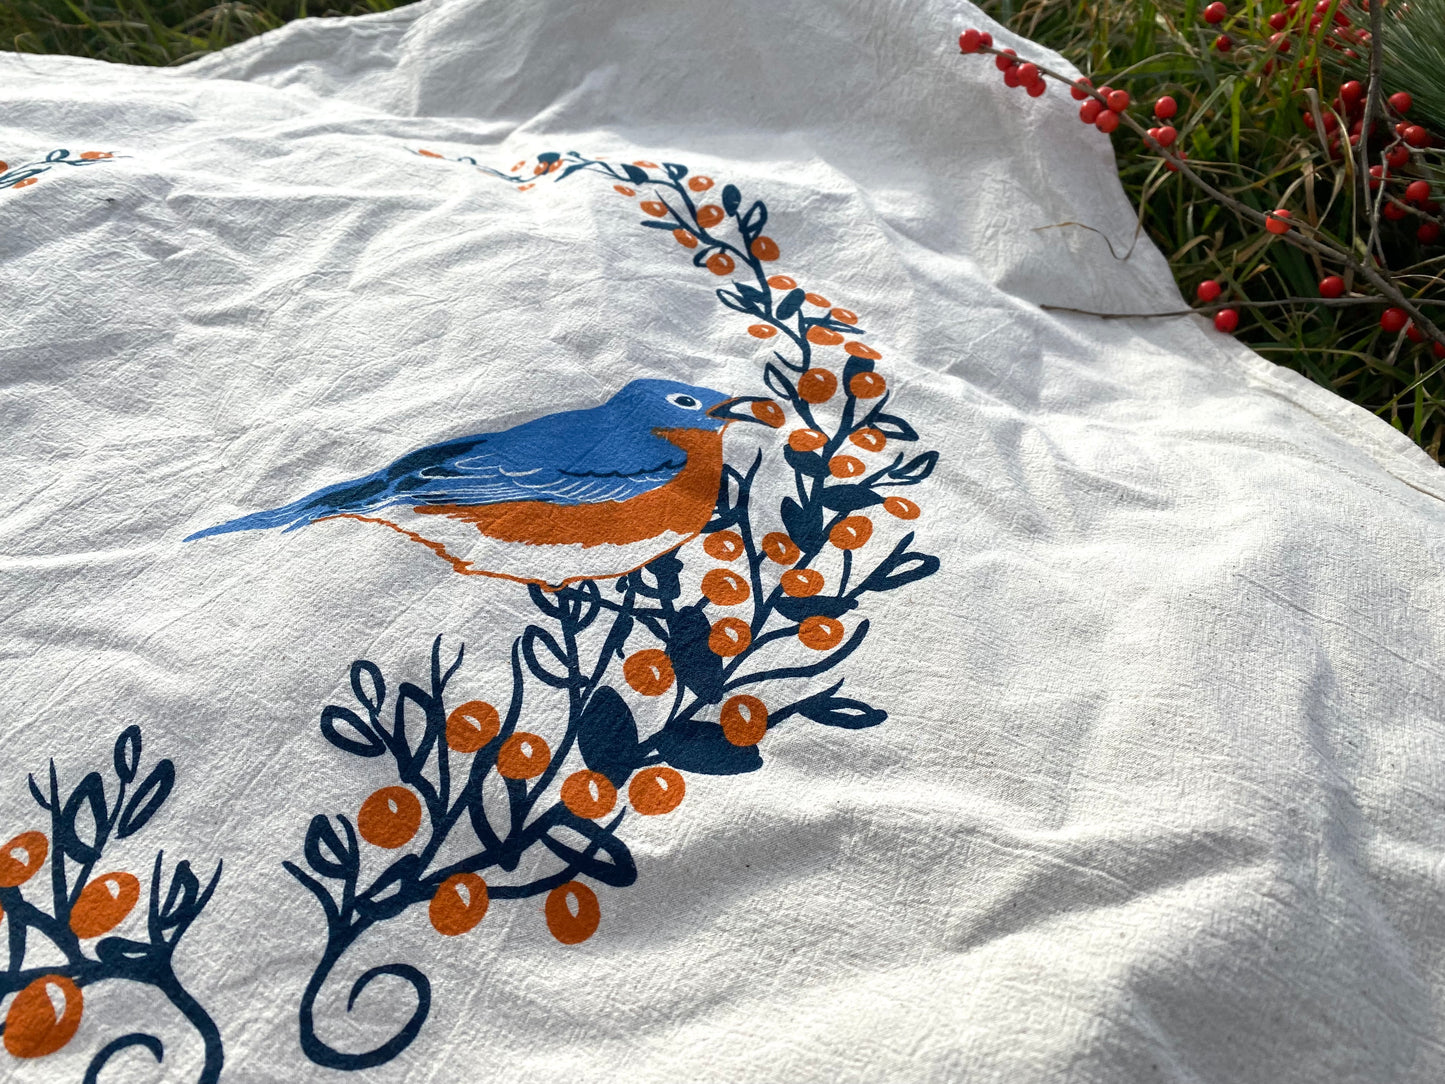 “Dismantling Perfection” (Bluebird on Wreath of Berries) Flour Sack Towel— from the 'Fly Free' Collection